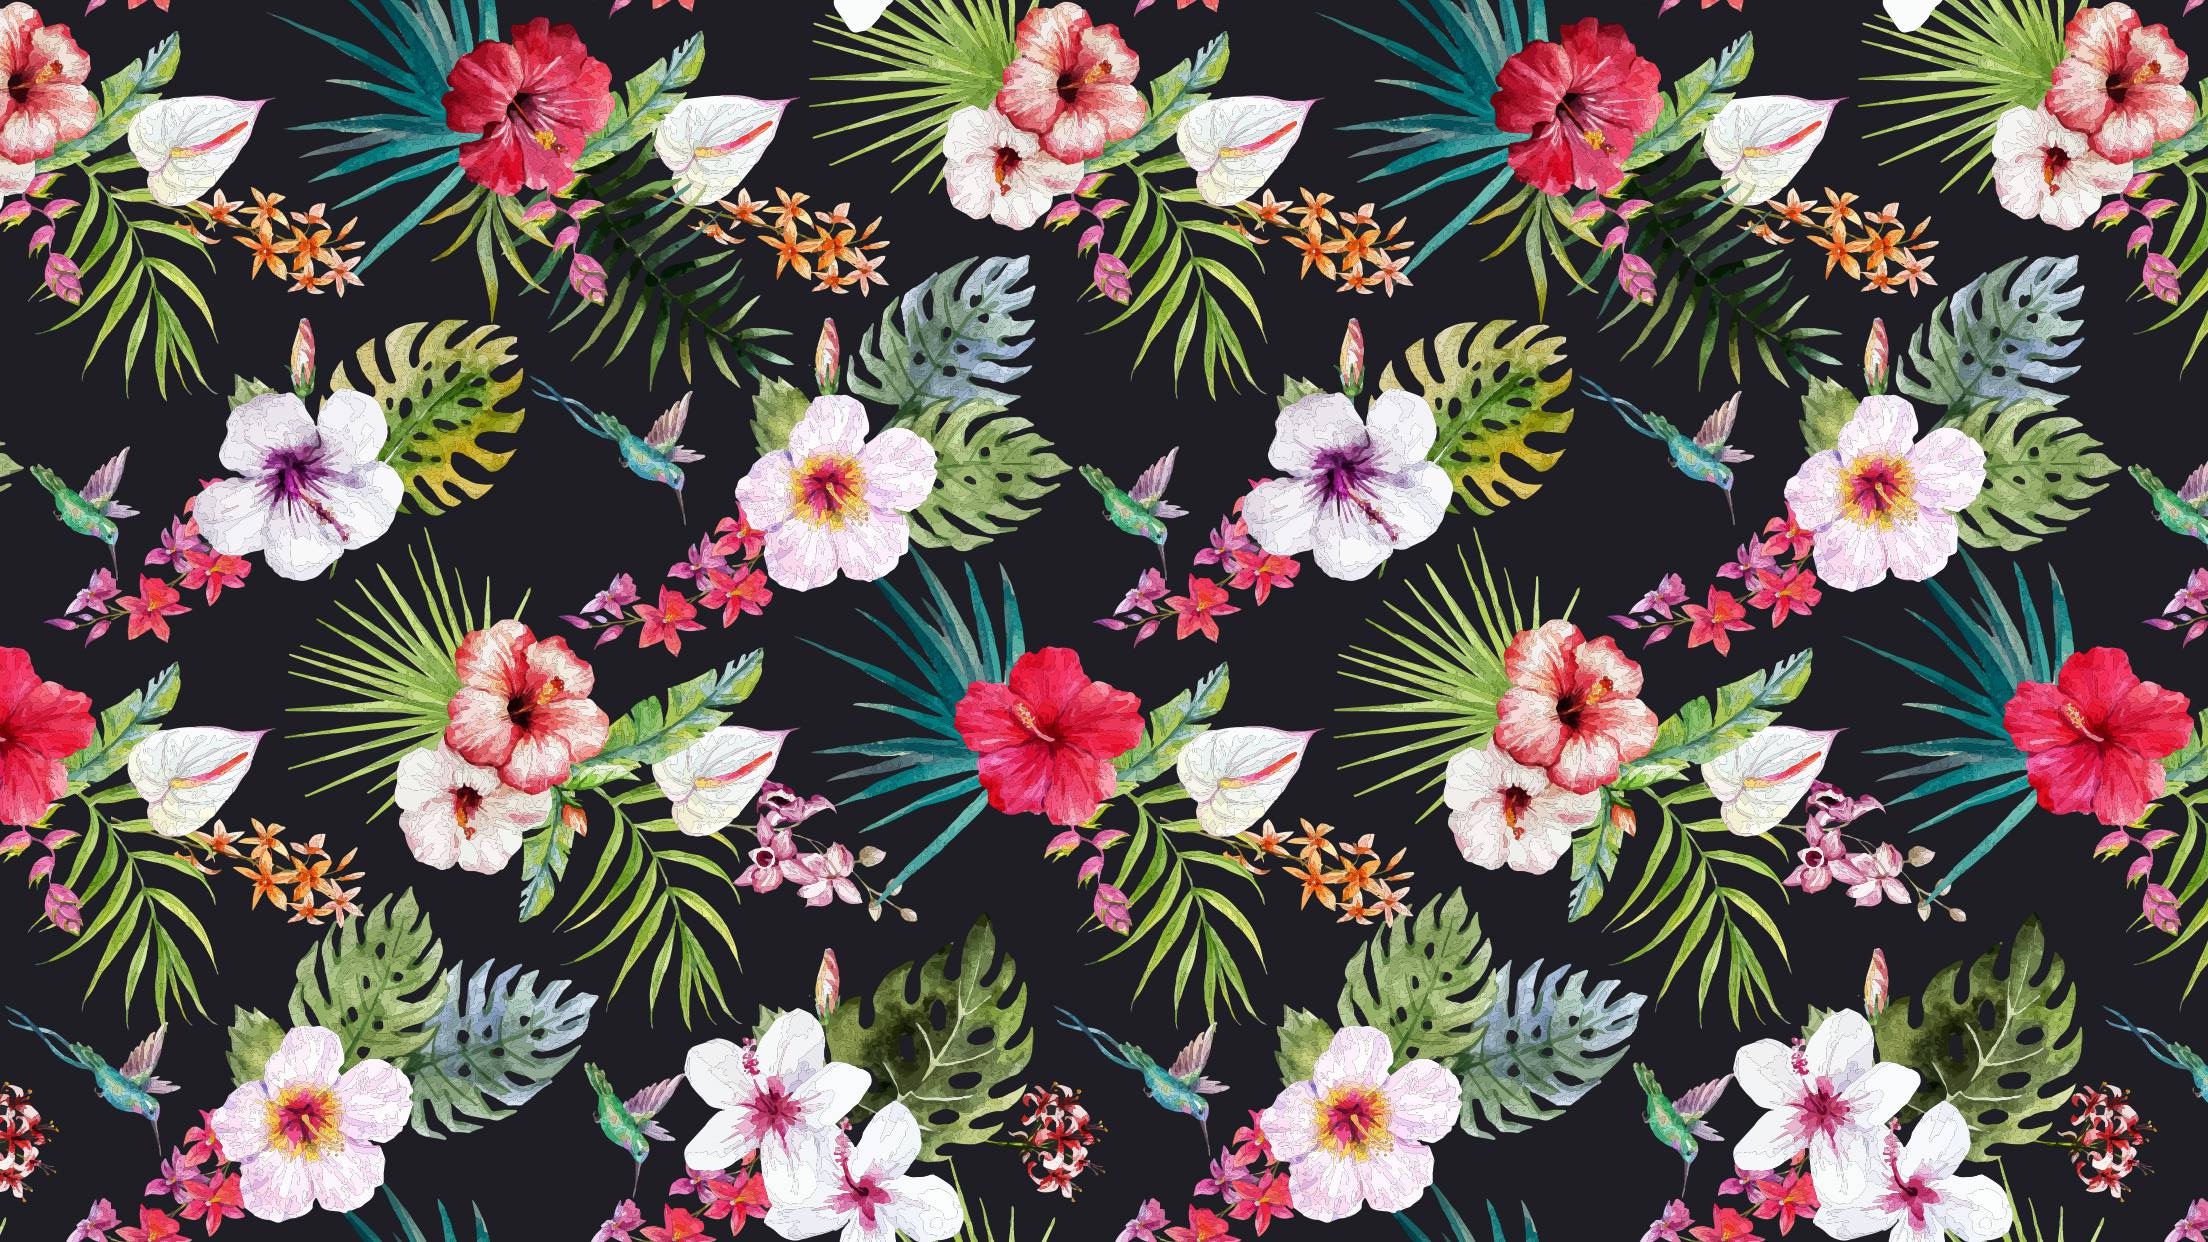 a_pattern_of_flowers_and_leaves_01.jpg